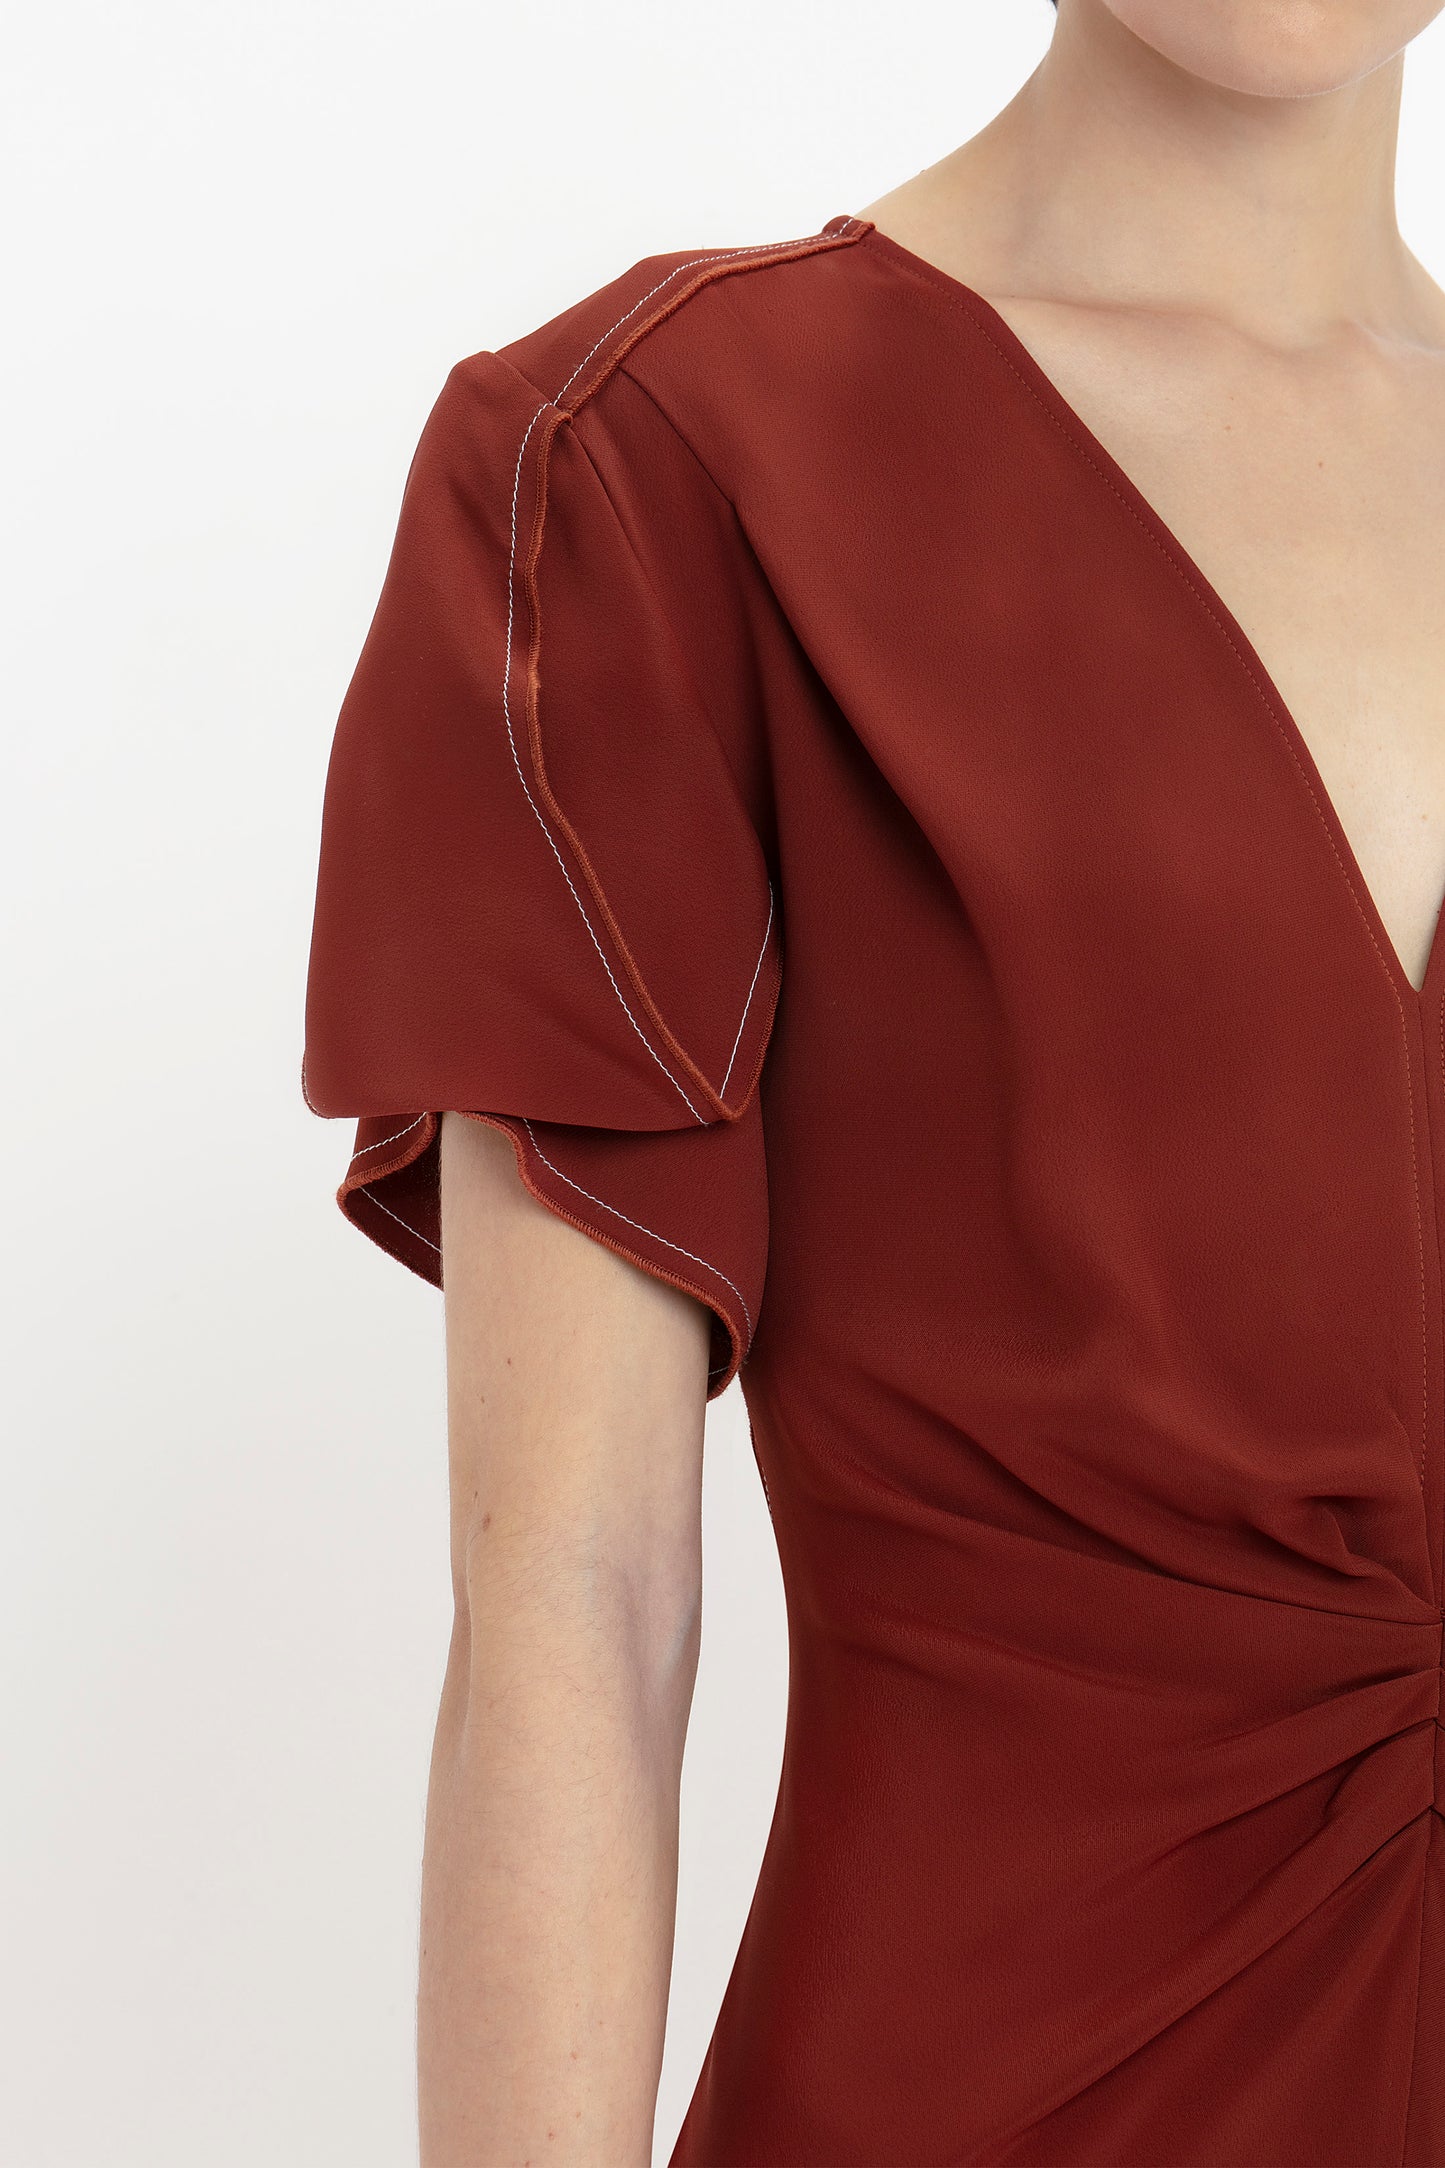 Close-up of a person wearing the Gathered V-Neck Midi Dress In Russet by Victoria Beckham, a waist-defining pleat detail dress with a deep V-neckline and short puff sleeves, featuring white stitching details.